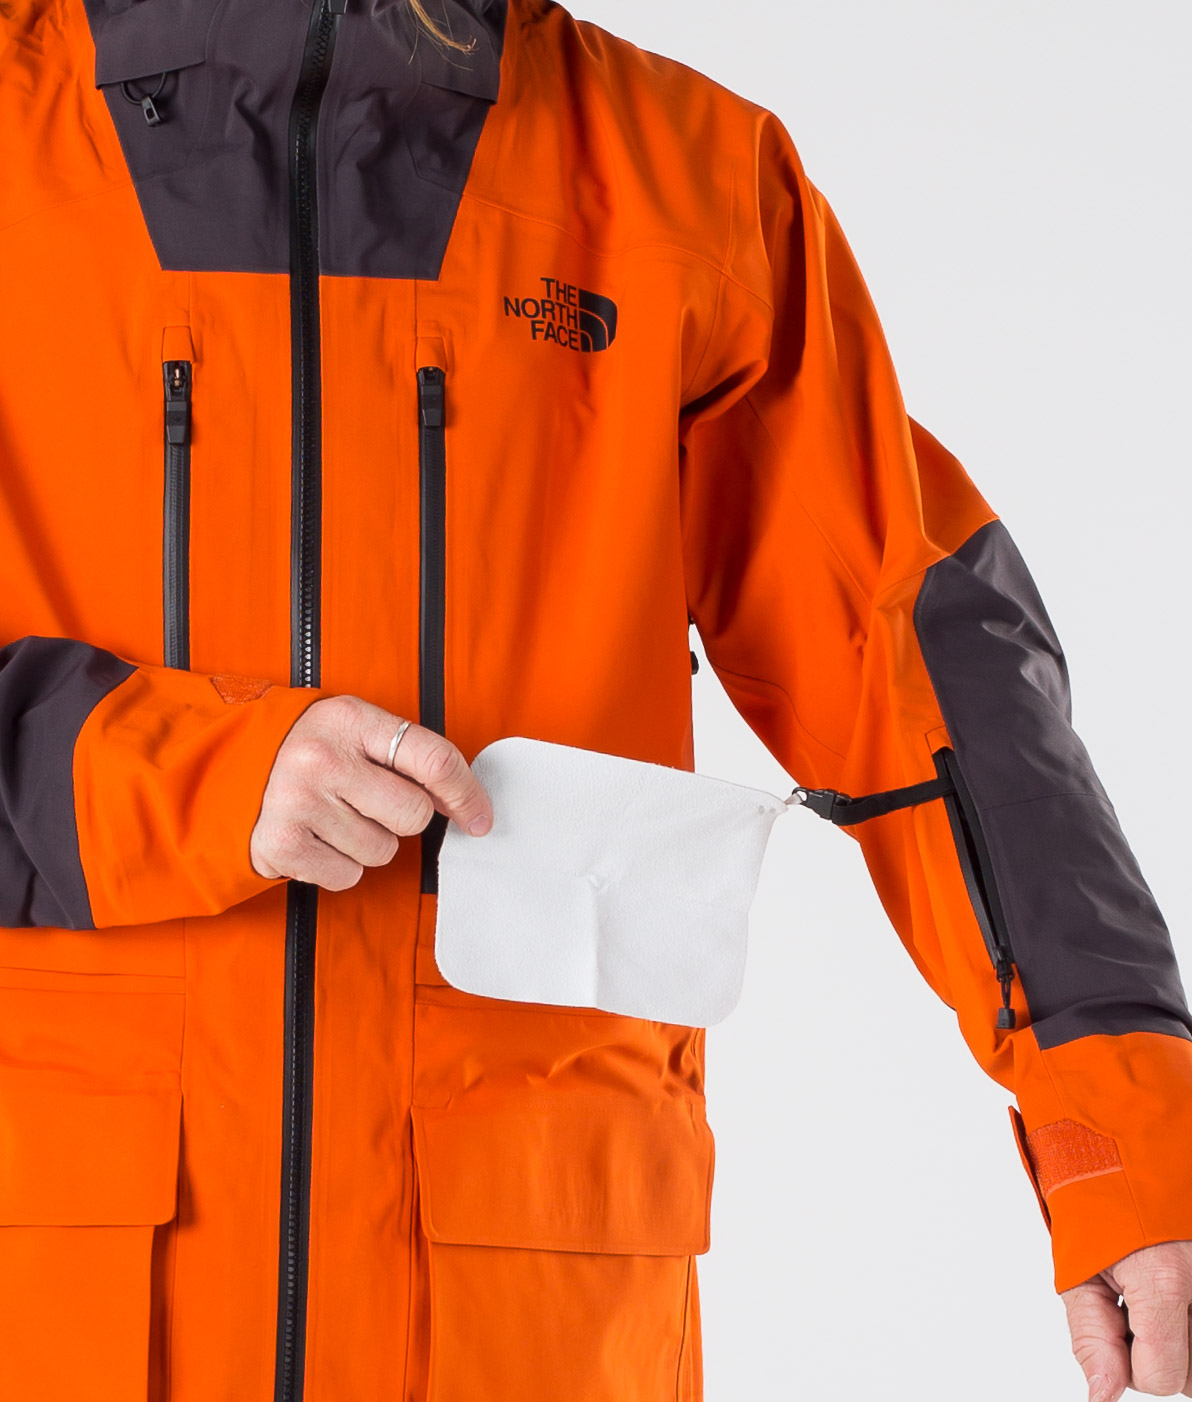 the north face workwear - sjvbca 